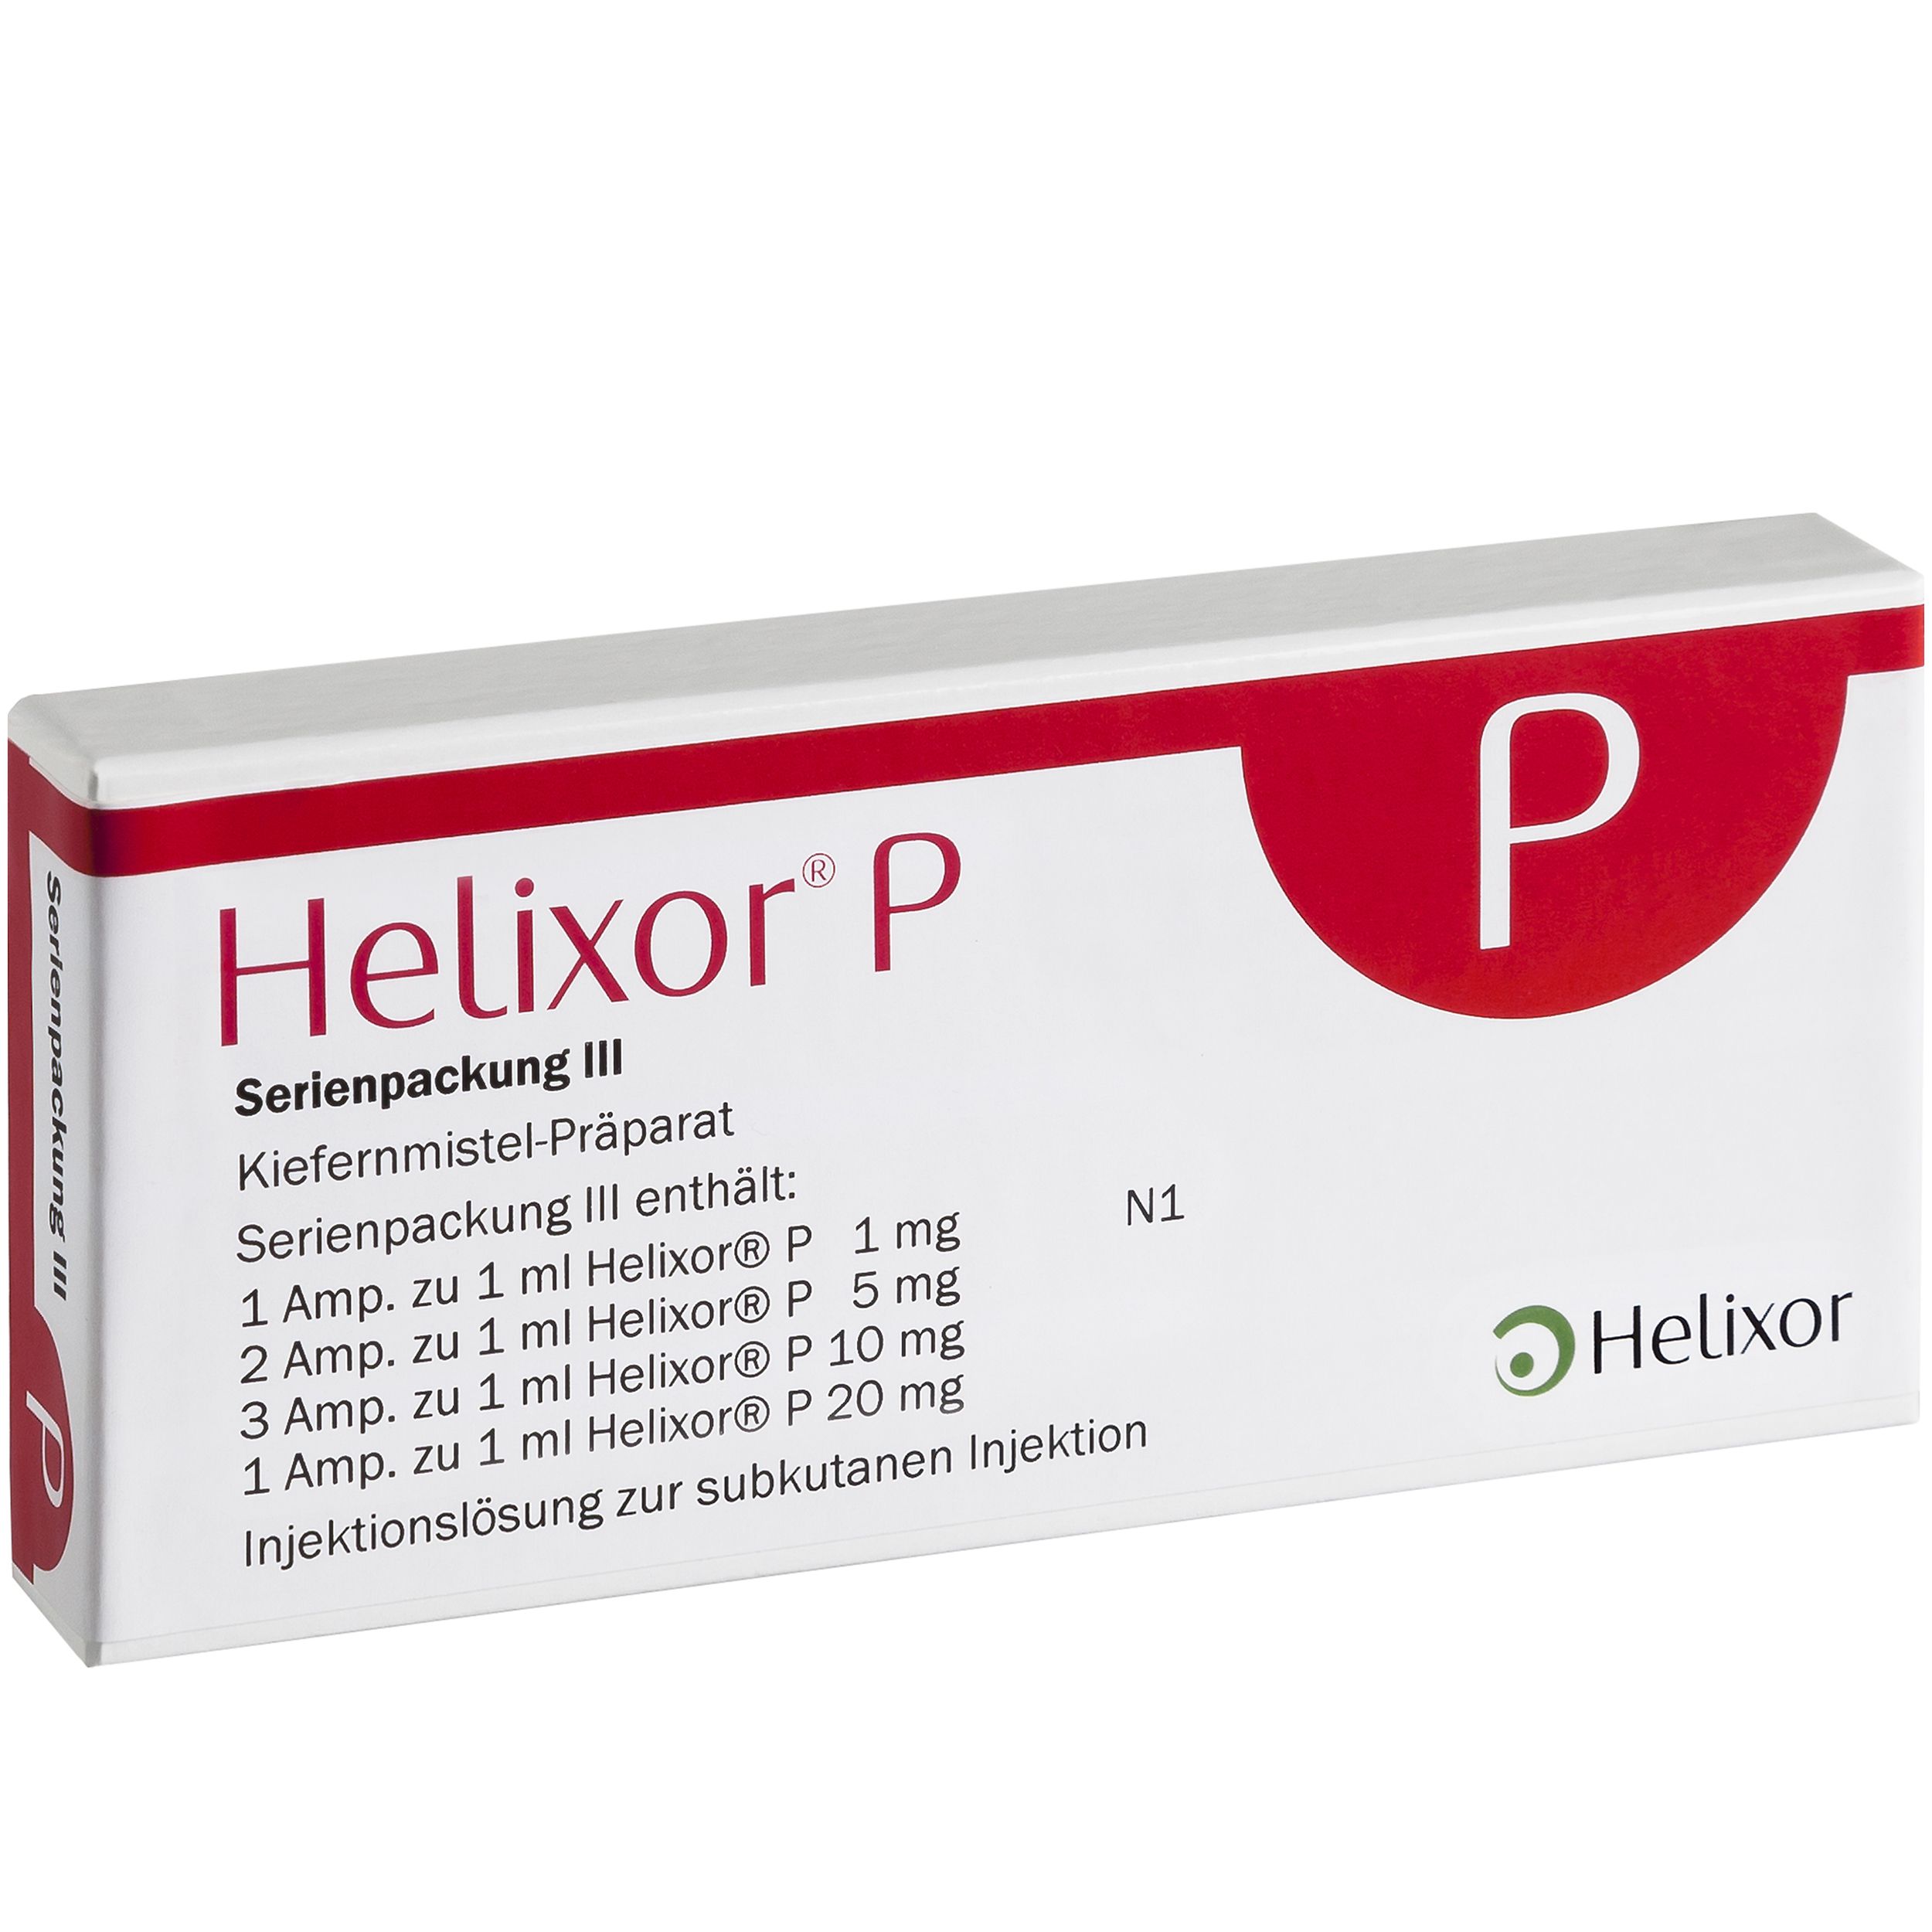 HELIXOR P series pack III ampoules